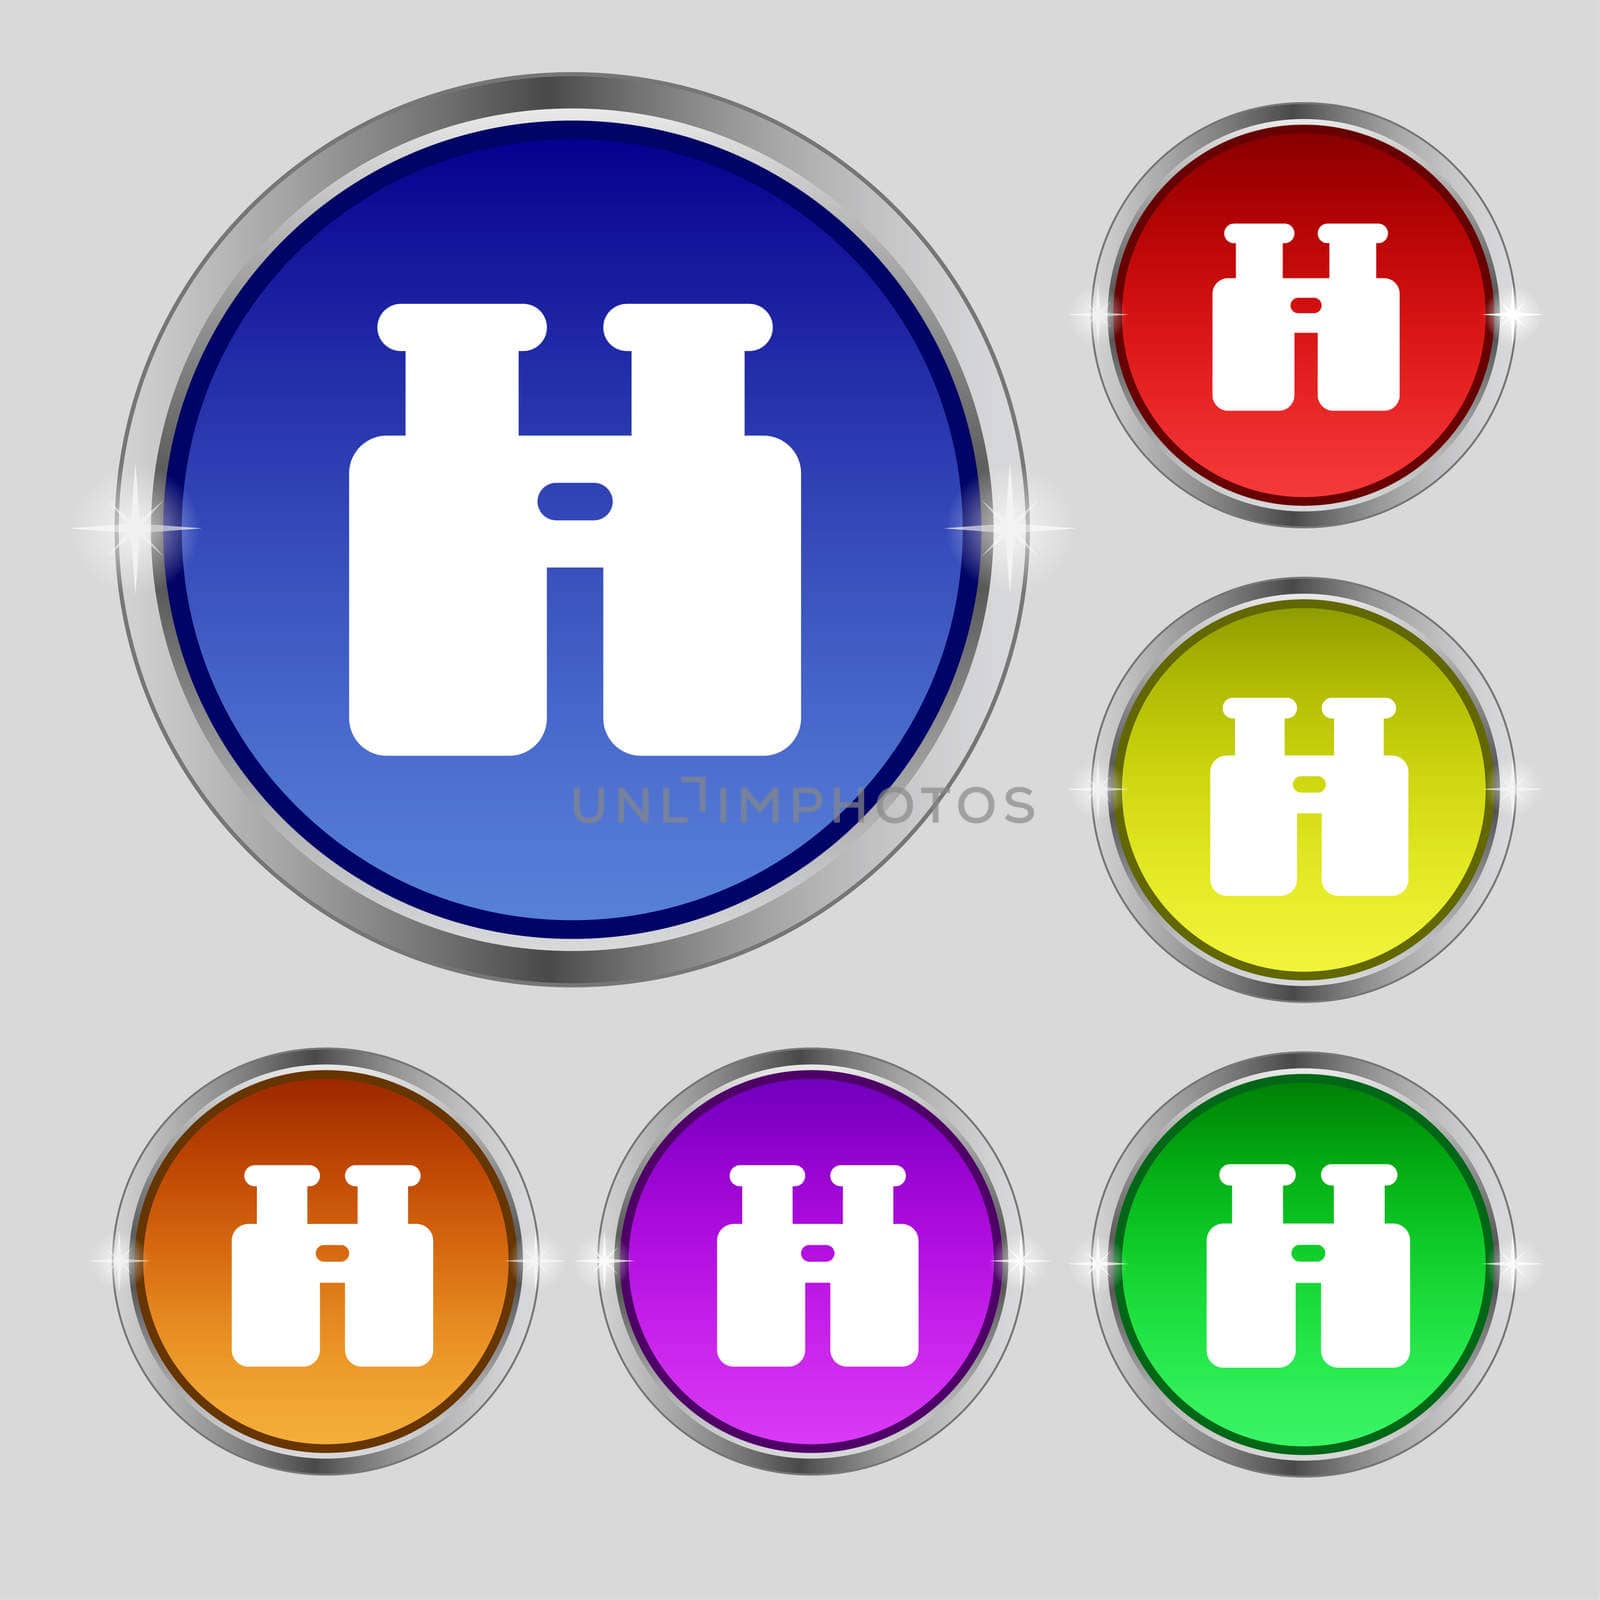 Binocular, Search, Find information icon sign. Round symbol on bright colourful buttons. illustration